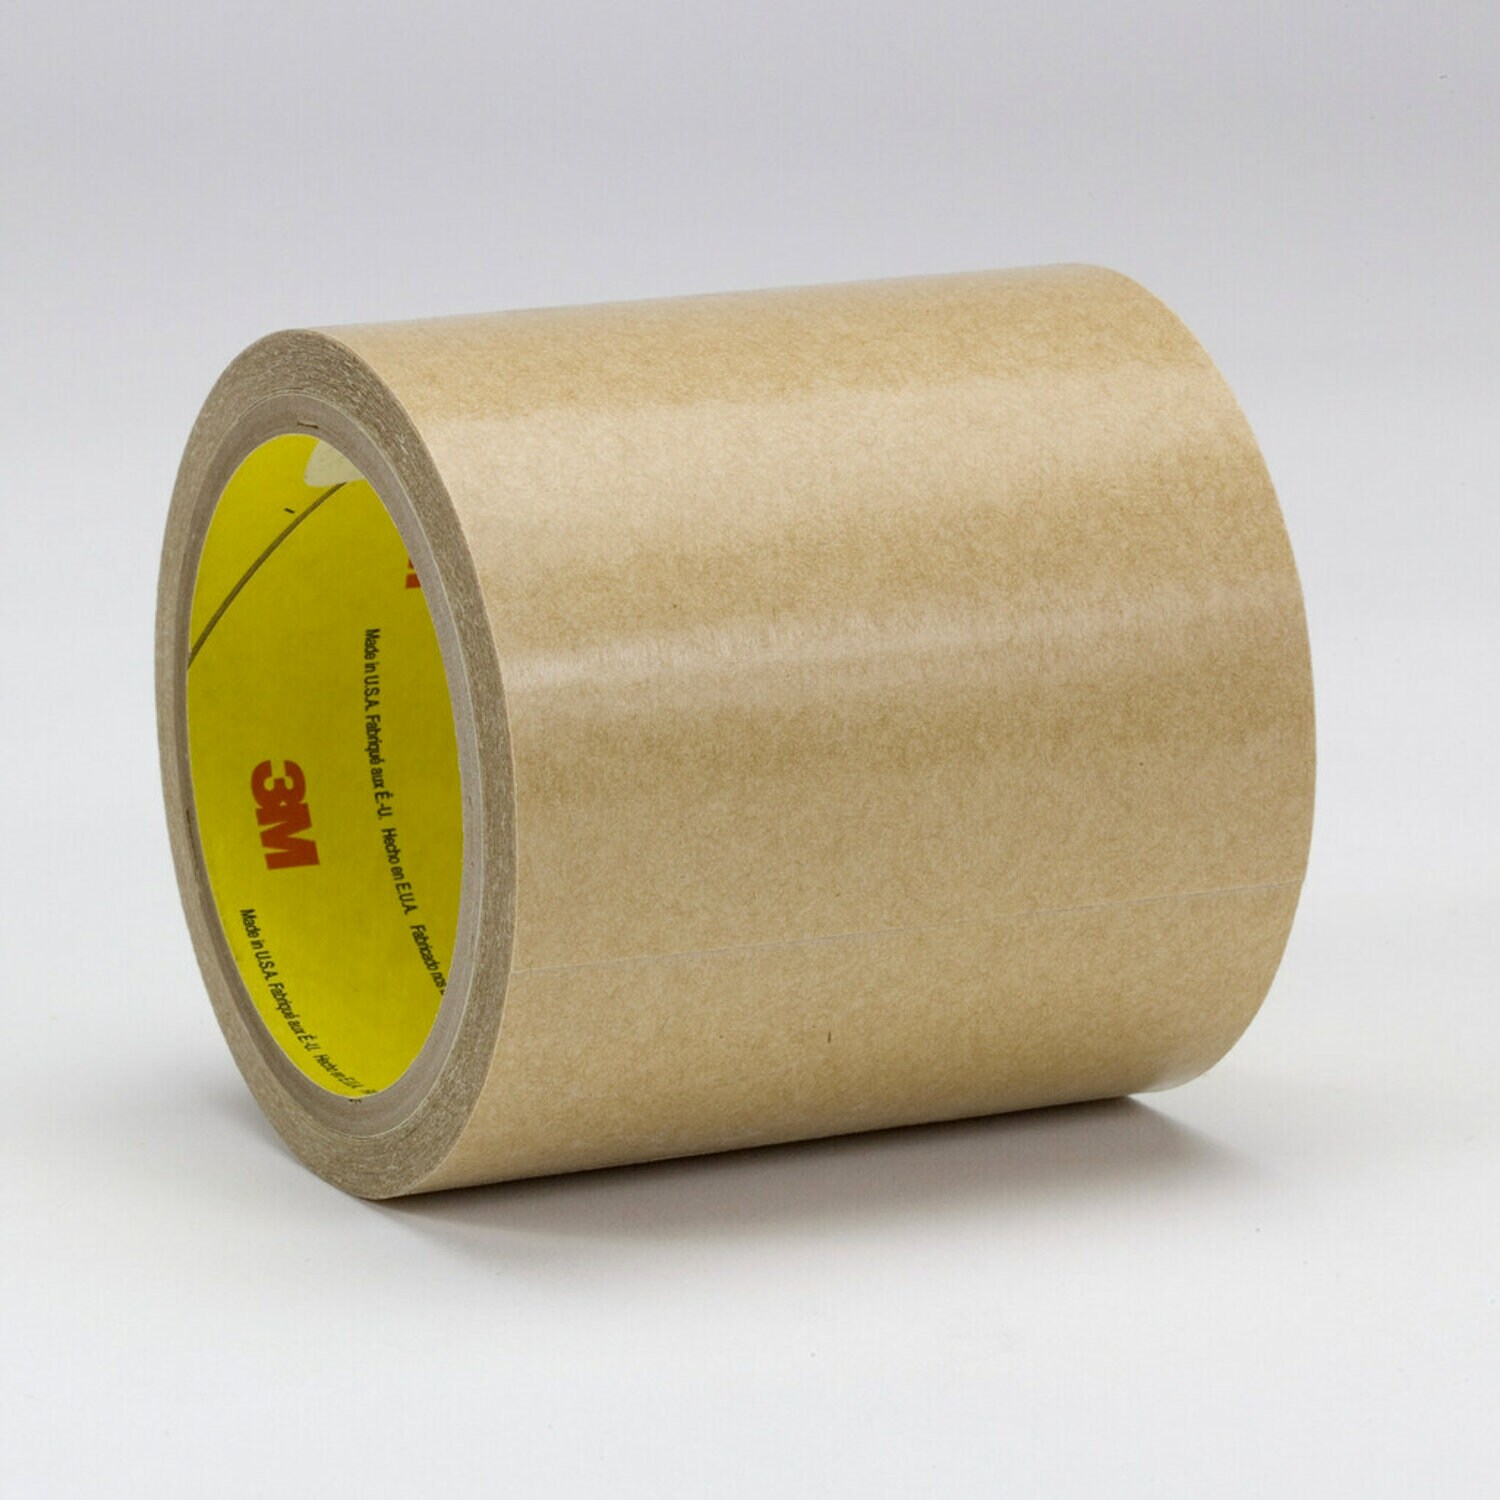 7000001189 - 3M Adhesive Transfer Tape 950, Clear, 48 in x 60 yd, 5 mil, 1 roll per
case